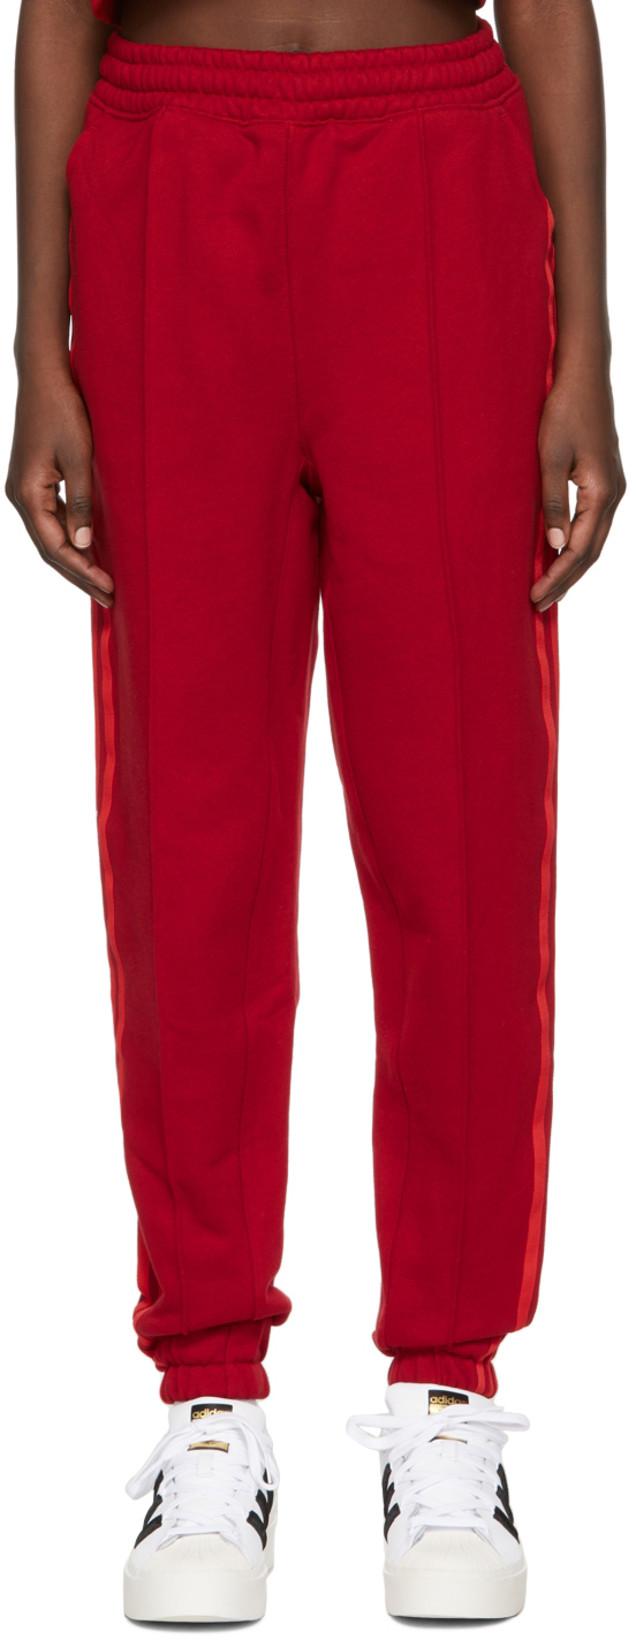 Red Cotton Lounge Pants by ADIDAS X IVY PARK